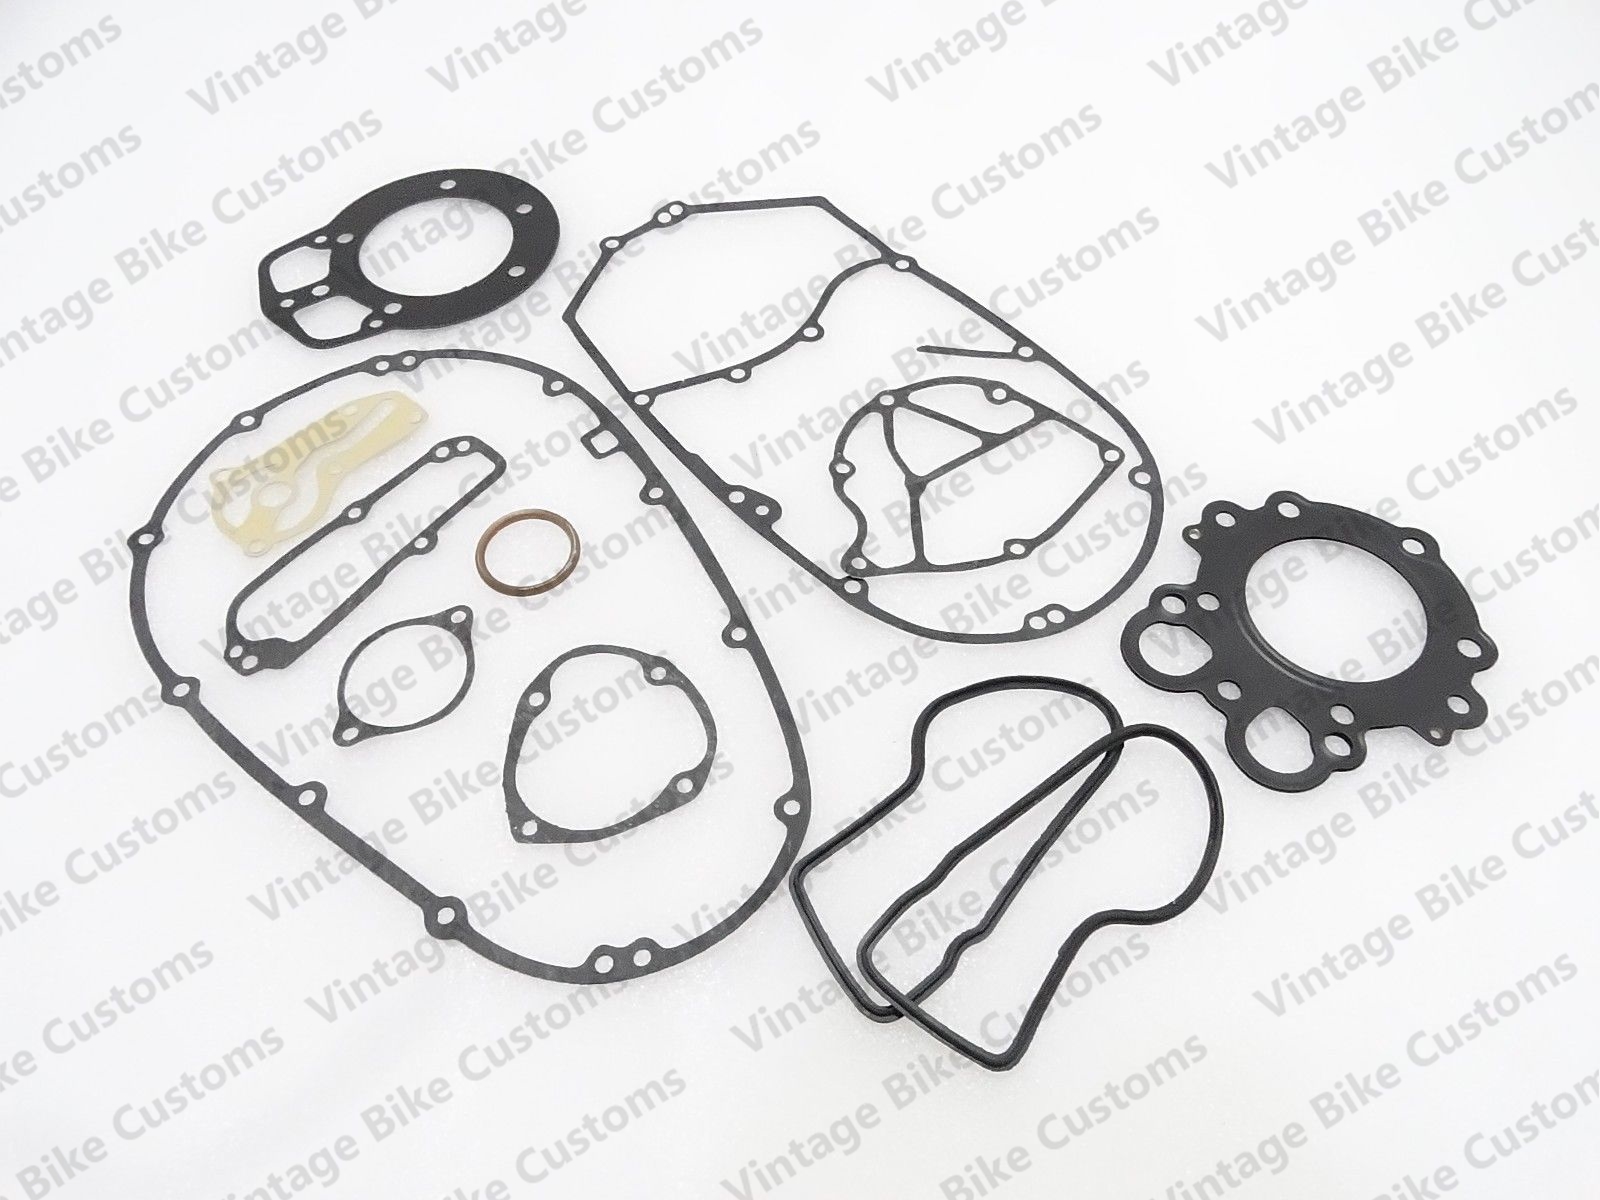 Details about   Royal Enfield Classic Twin Spark UCE 500CC Complete Gasket Set Best Quality 